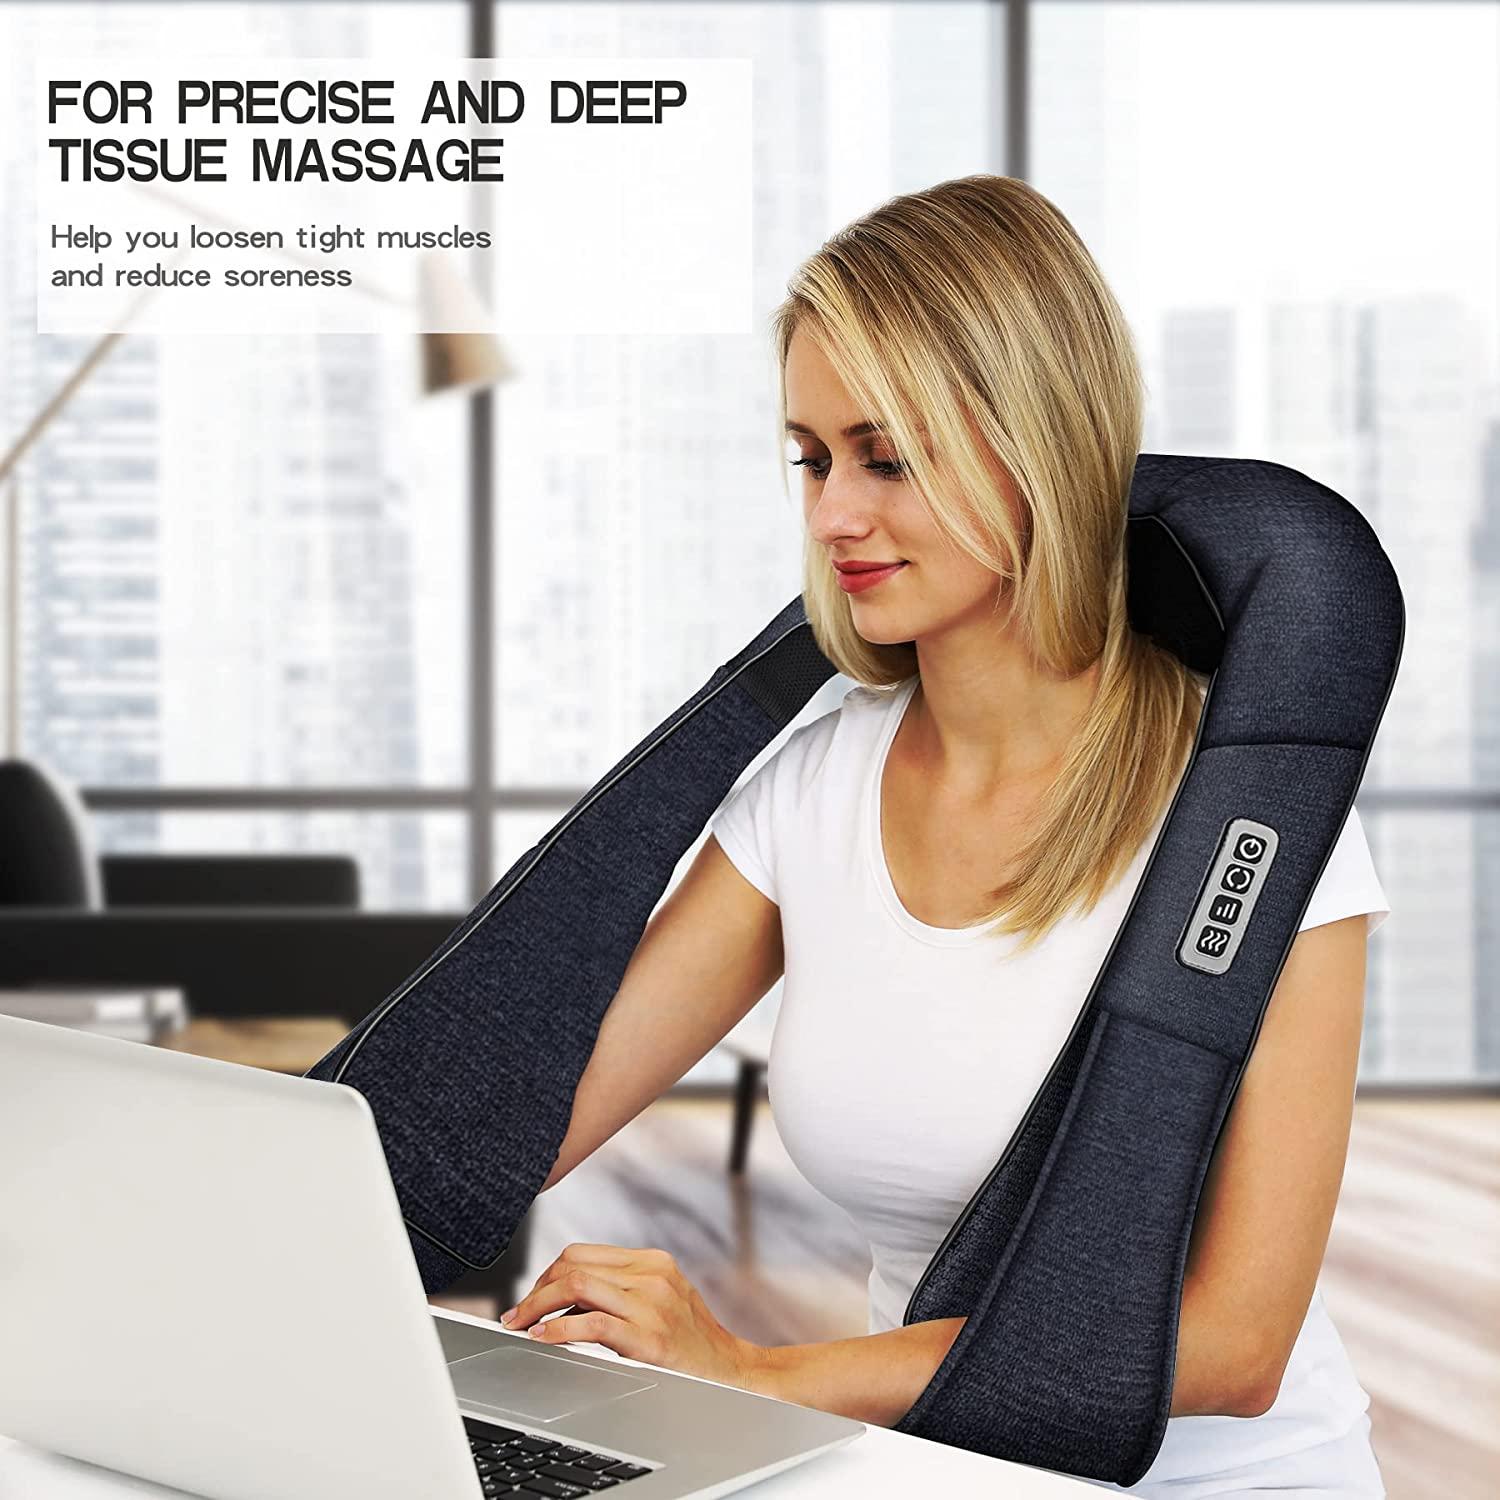 Mo Cuishle Shiatsu Back Shoulder And Neck Massager With Heat